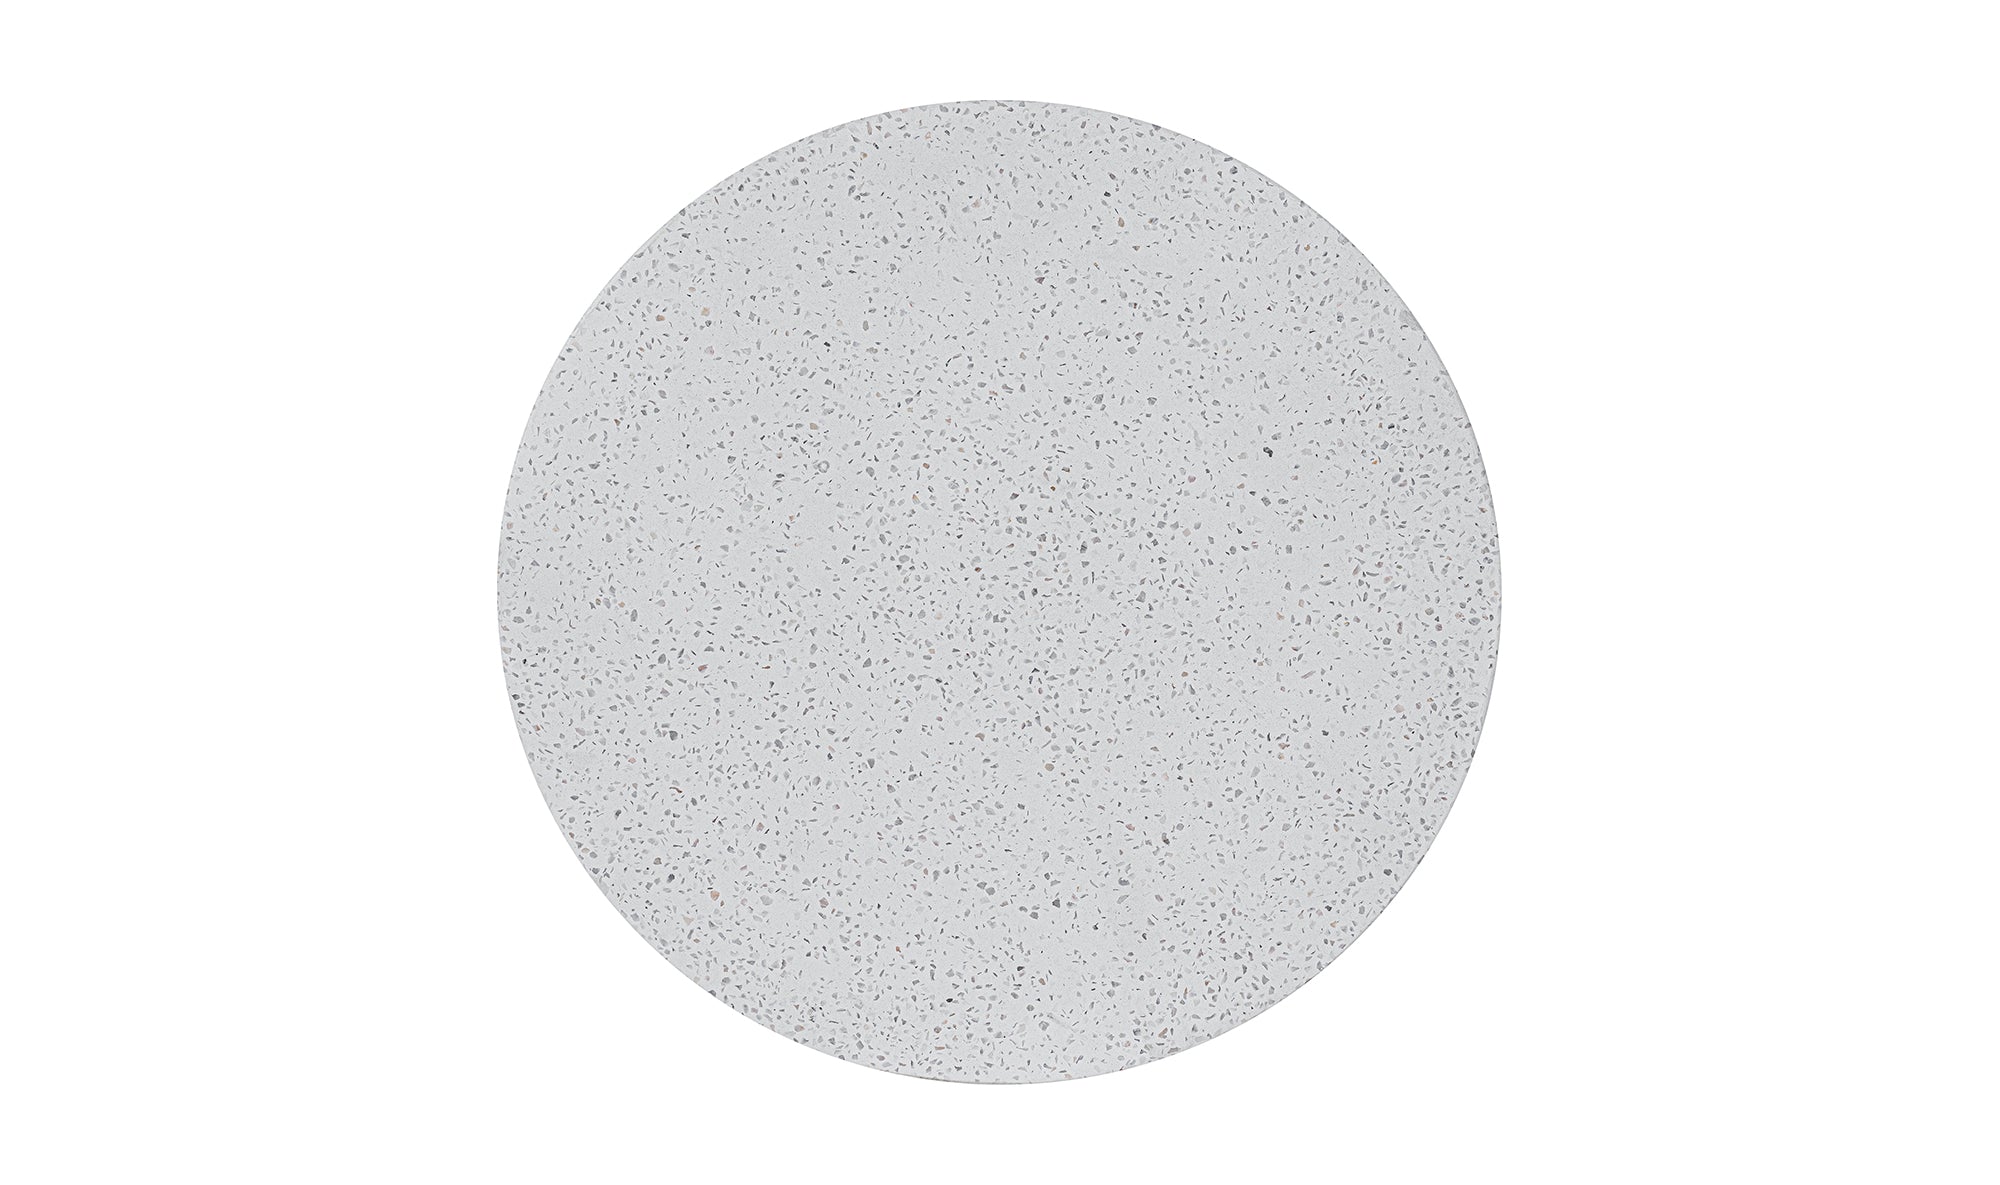 Mineral Terrazzo Outdoor Table